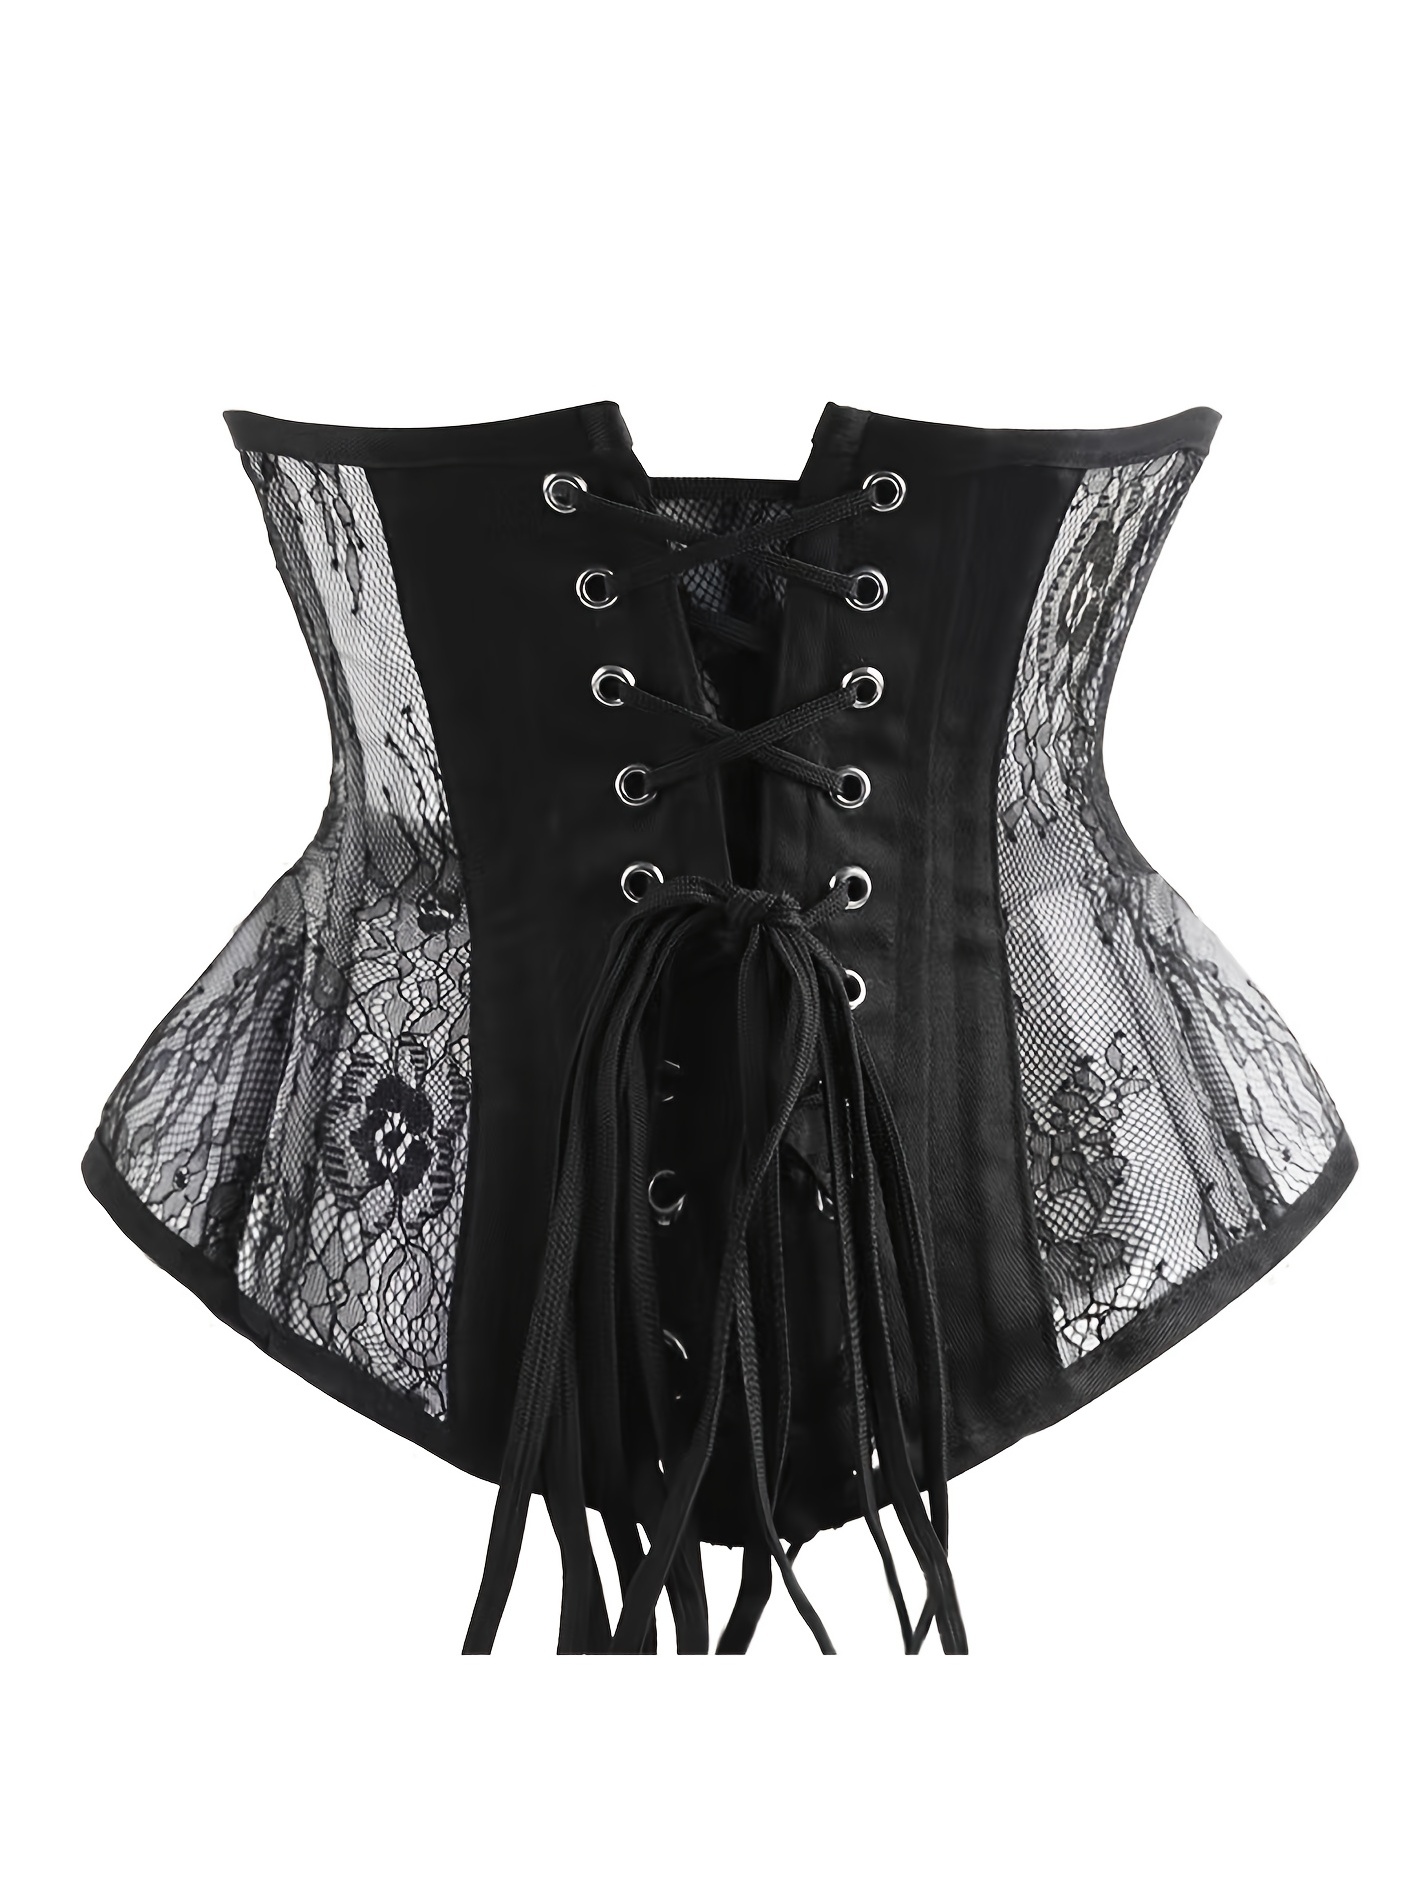 Real Steel Boned Underbust Underwear Corset From Transparent Mesh and  Cotton. Real Waist Training Corset for Tight Lacing. 